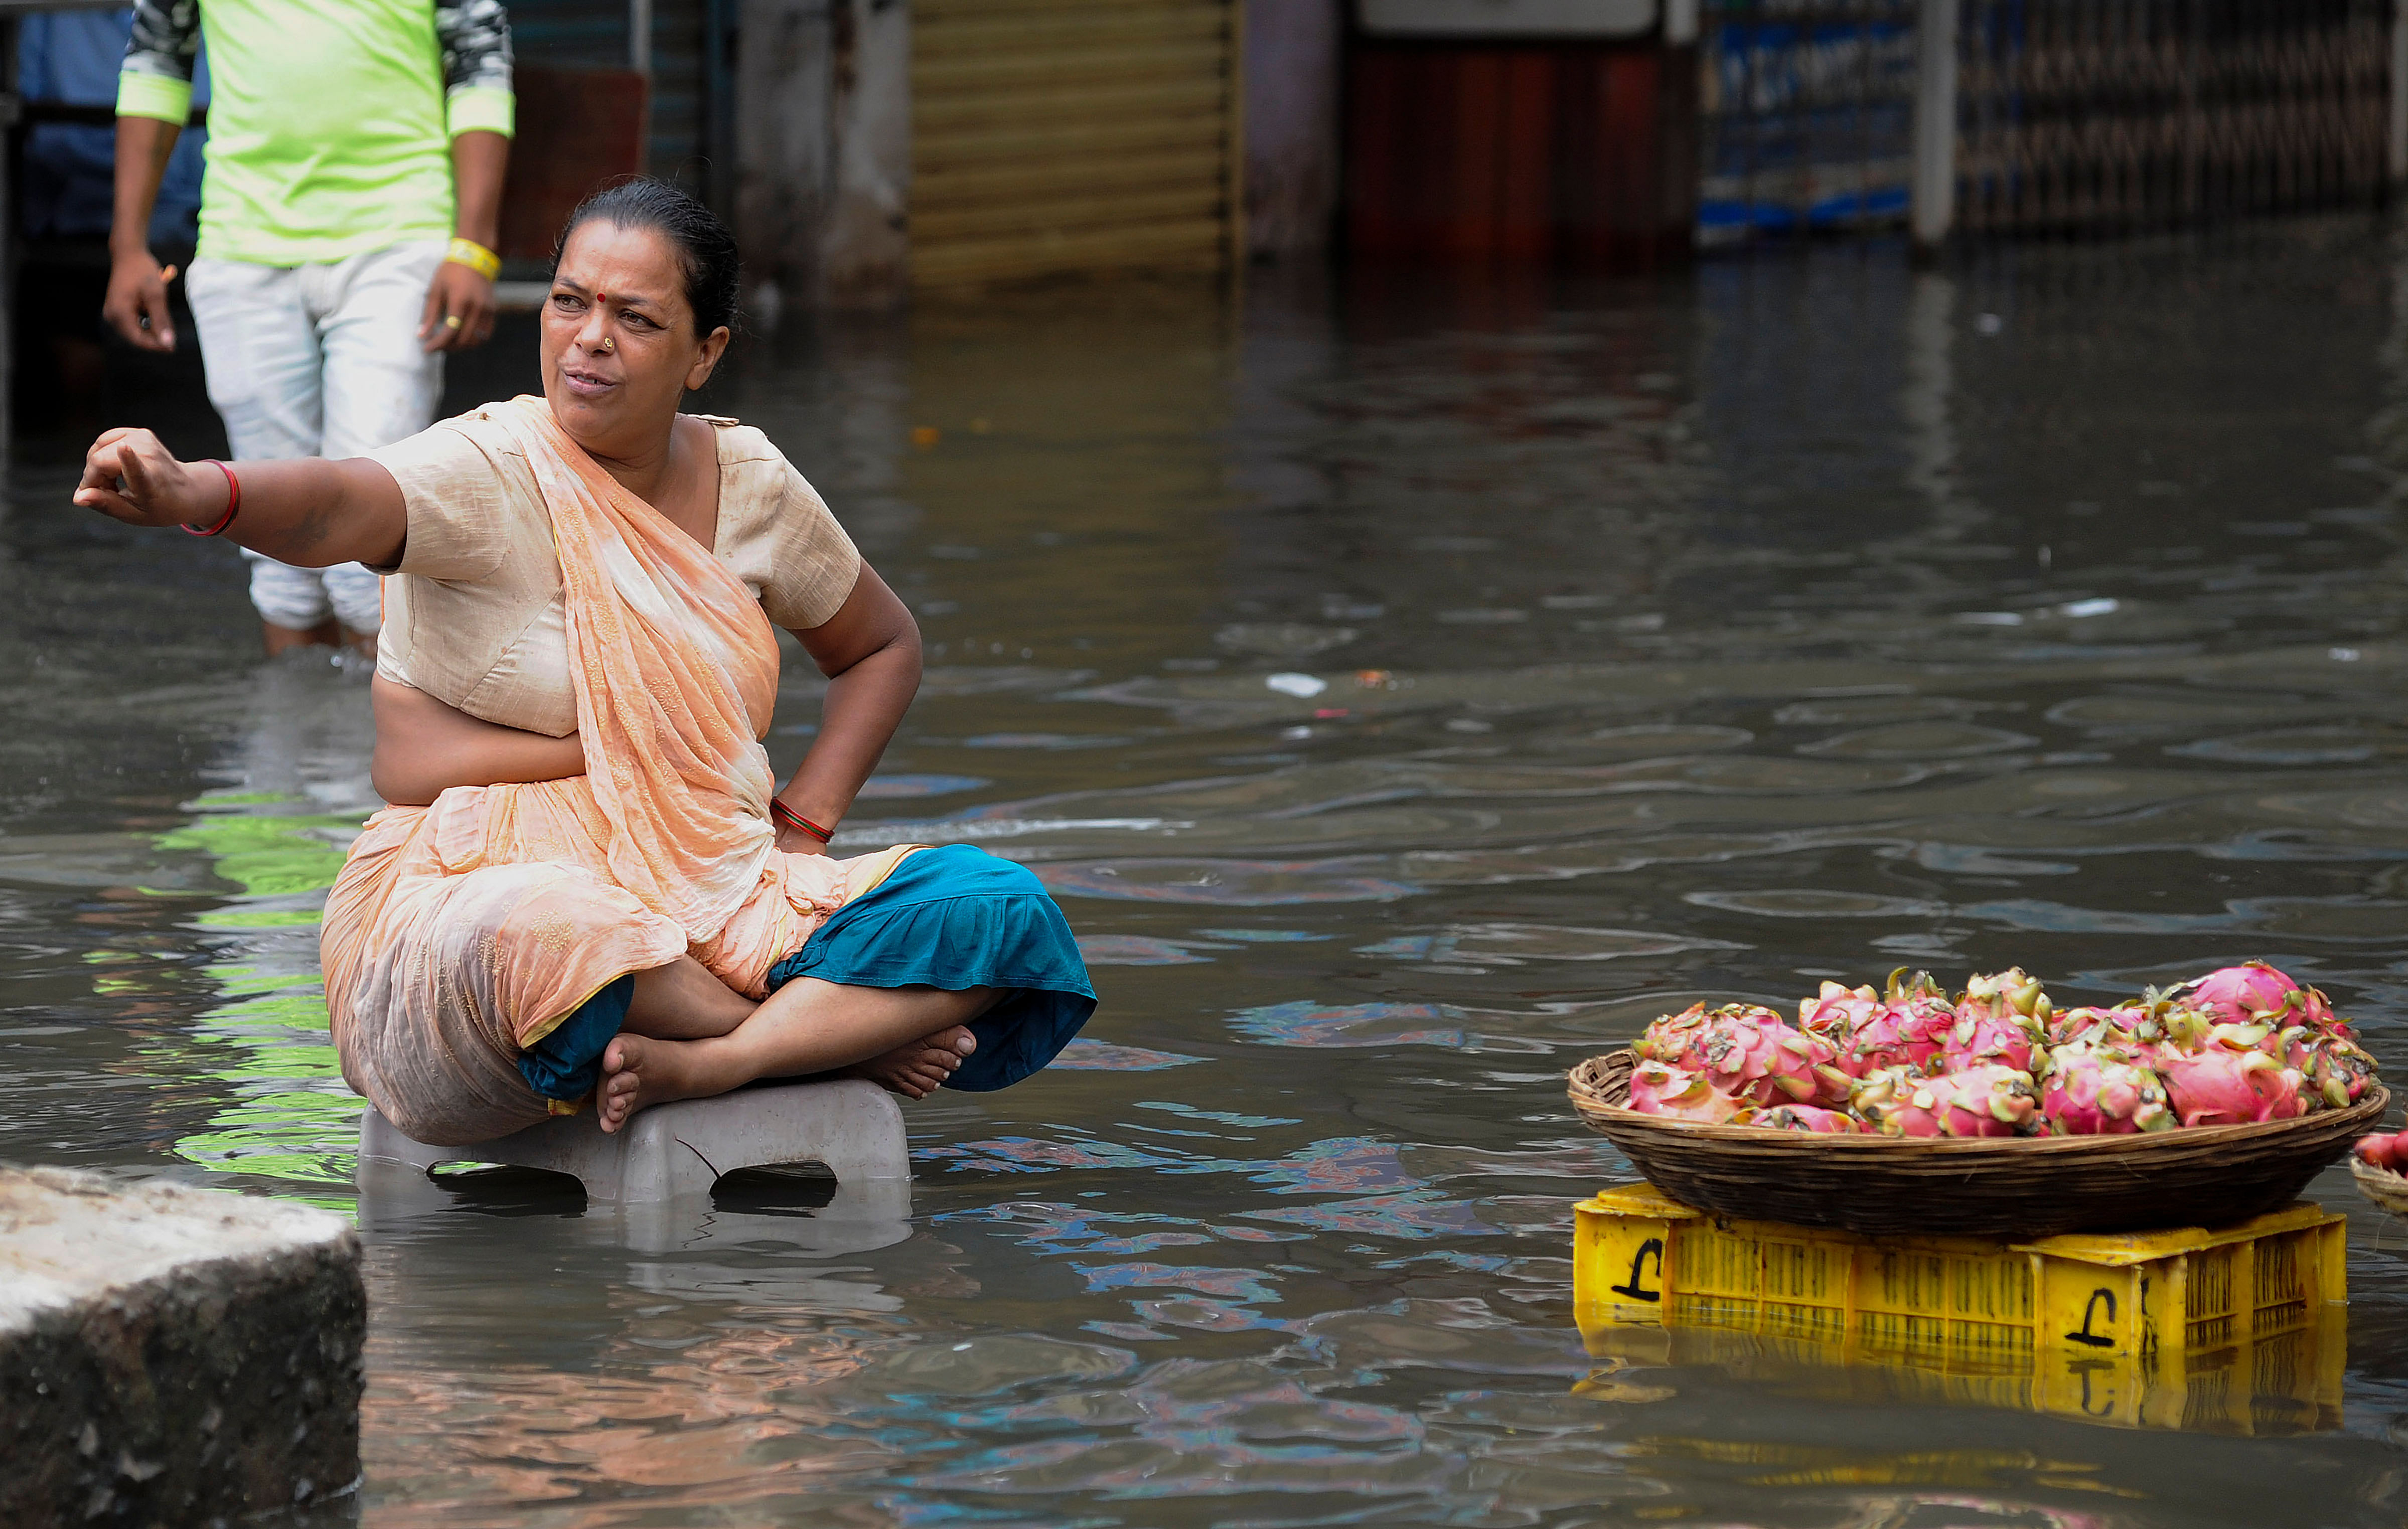 According to an official, illegal constructions on water streams were the main cause of deluge in the city. (PTI Photo)